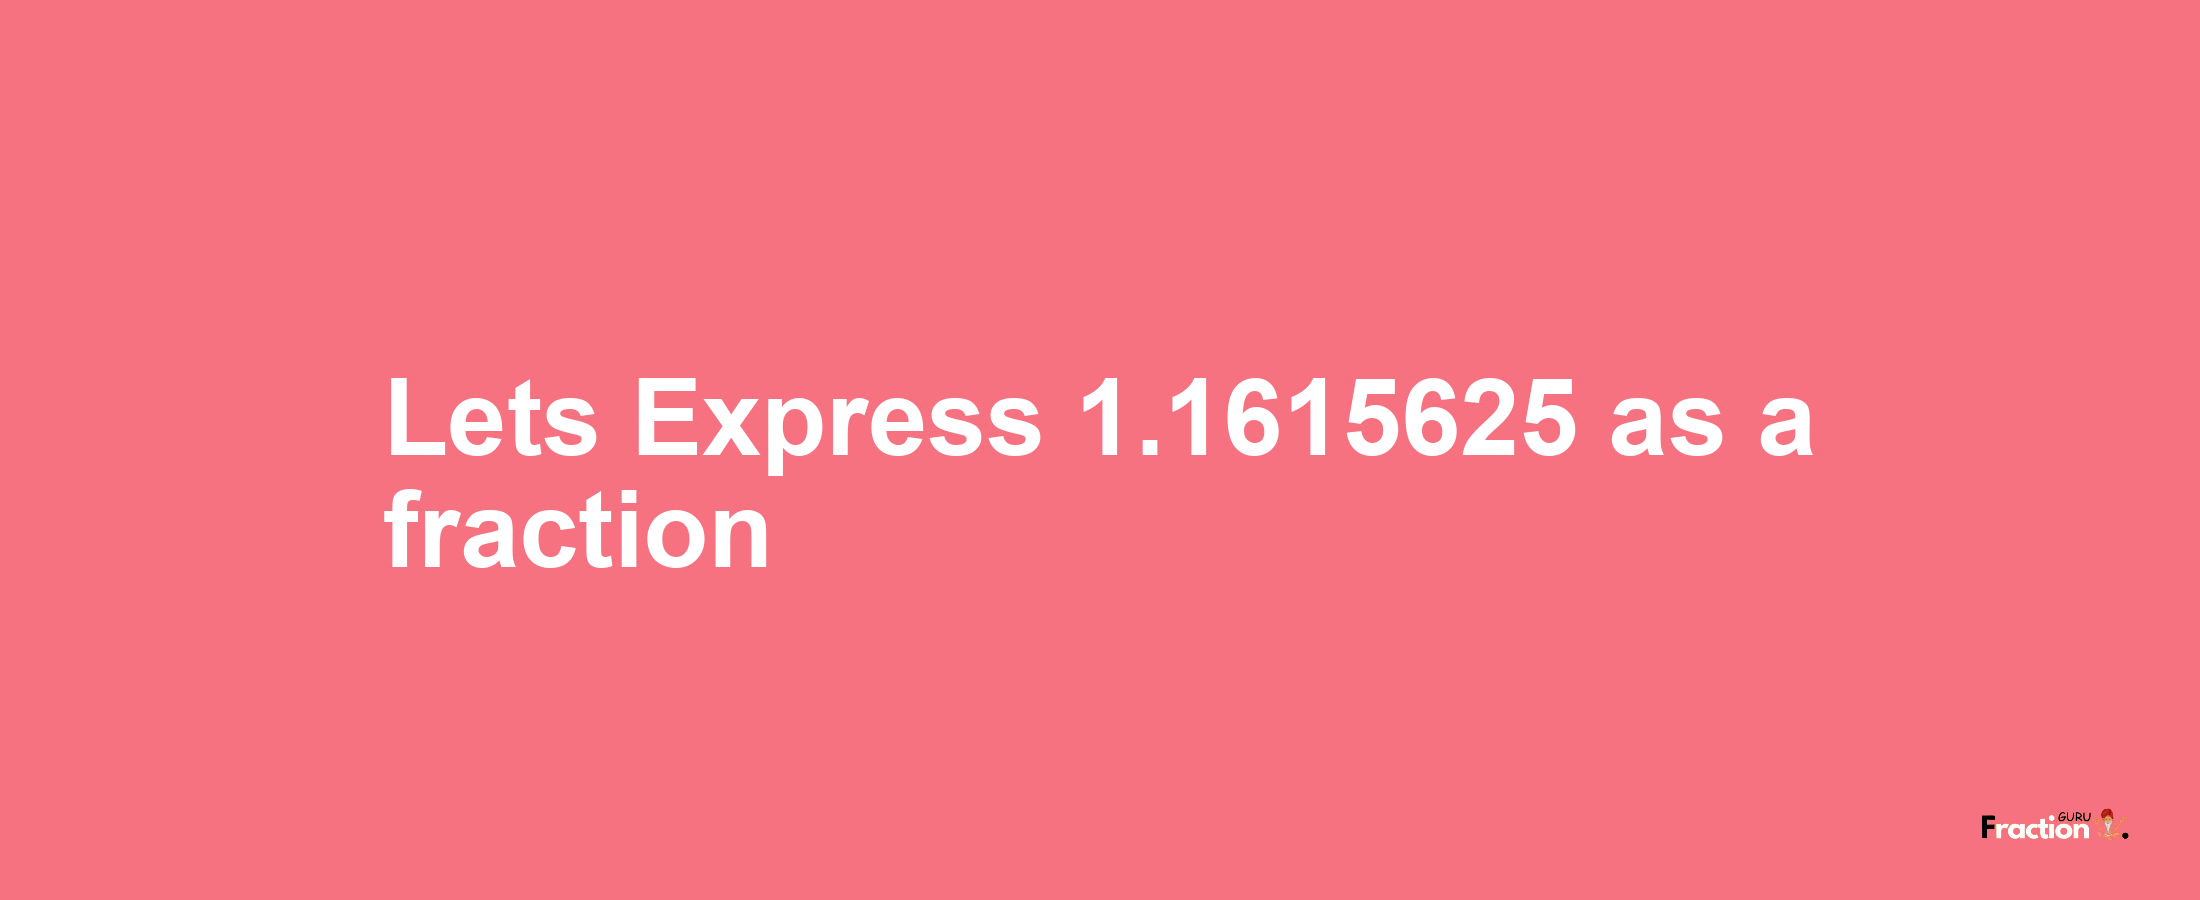 Lets Express 1.1615625 as afraction